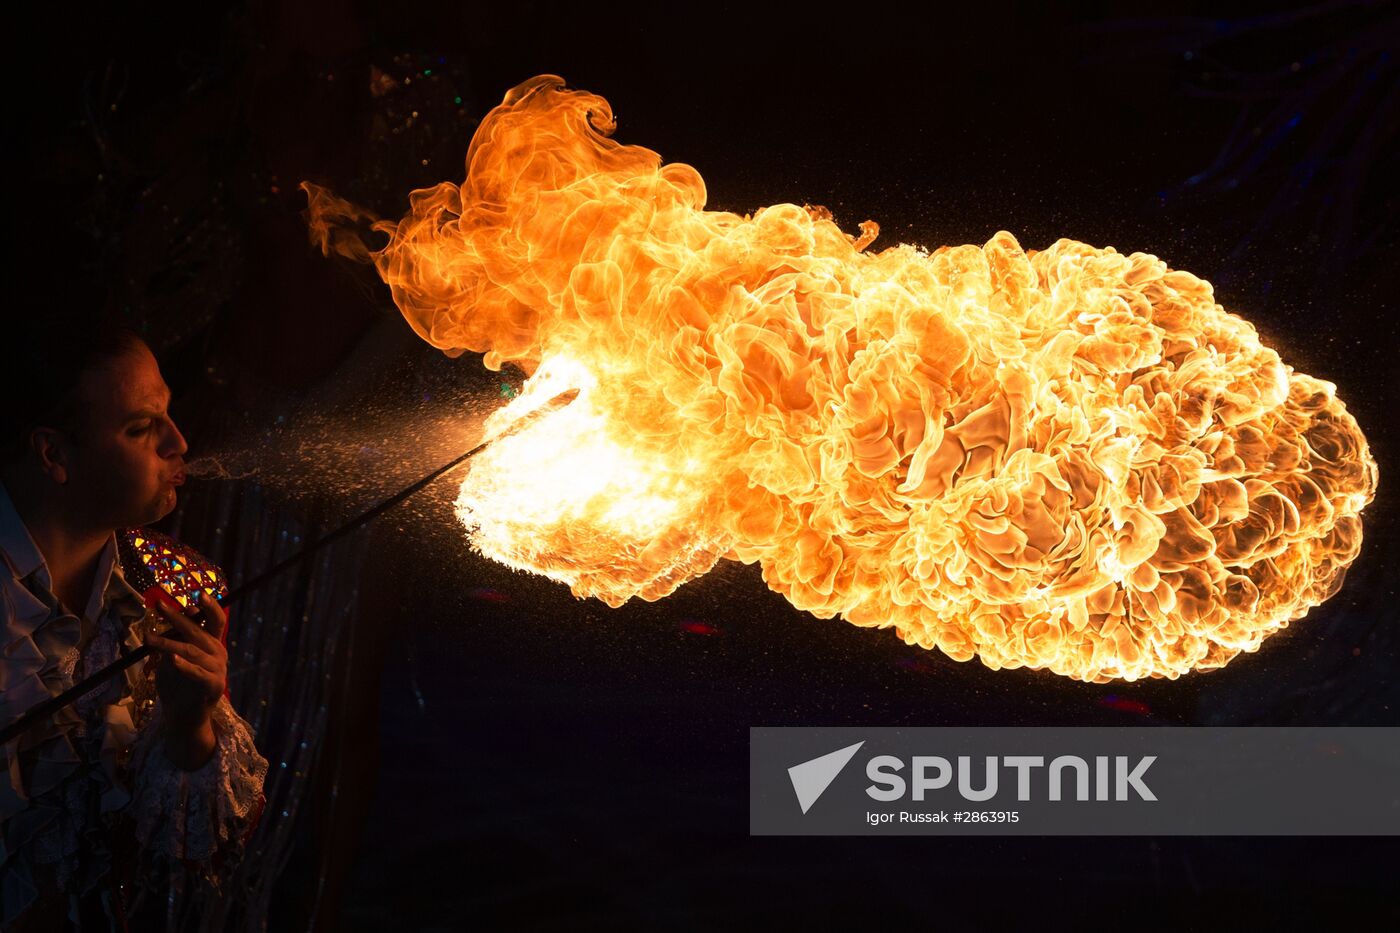 Water, Fire and Light Circus show in St. Petersburg